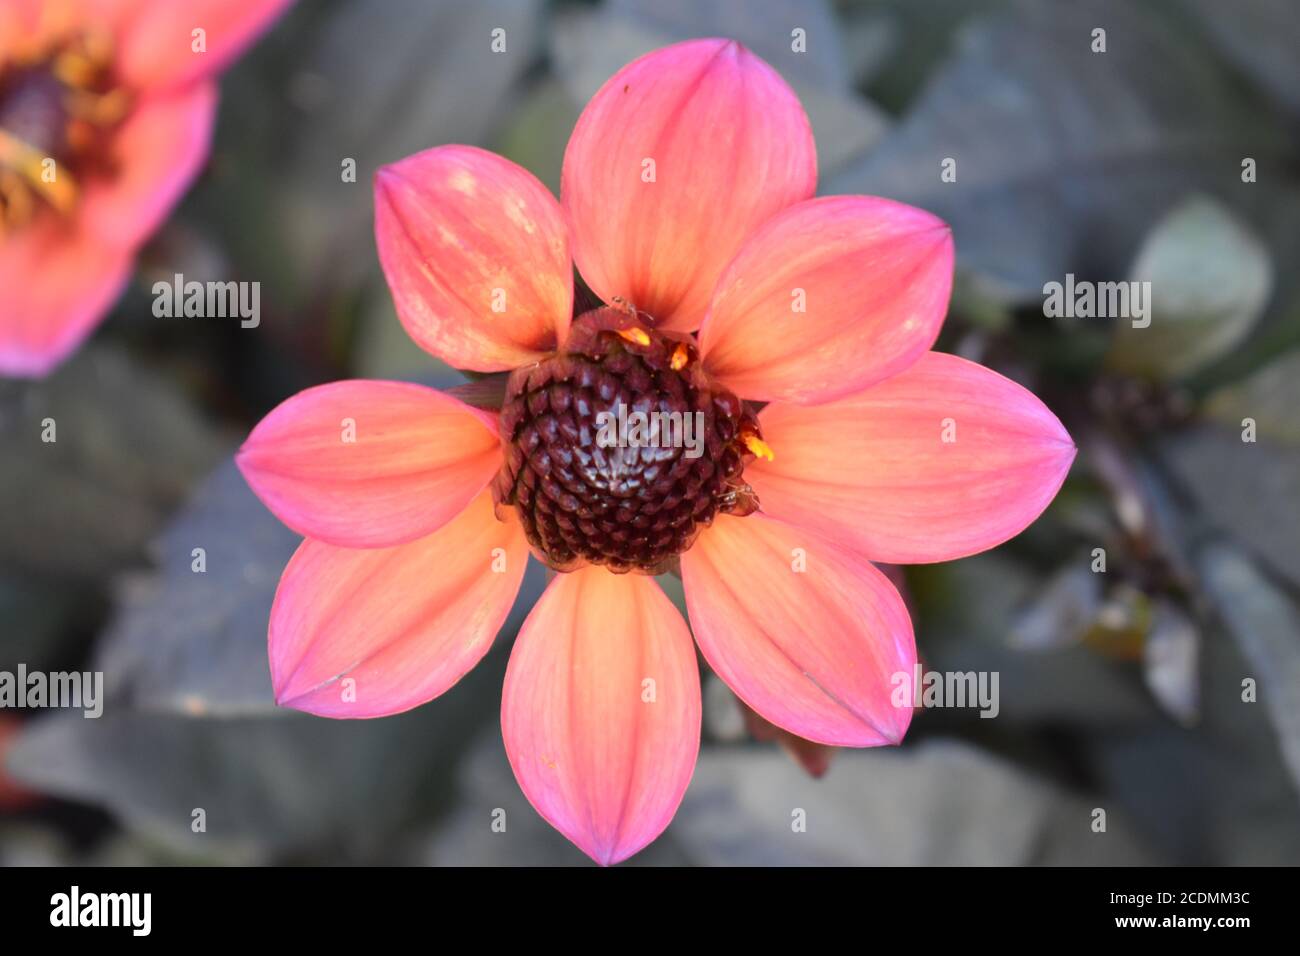 Single, pink, garden dahlia (Dahlia Pinnata) on a blurred leafy background This is a species in the genus Dahlia, family Asteraceae. Stock Photo